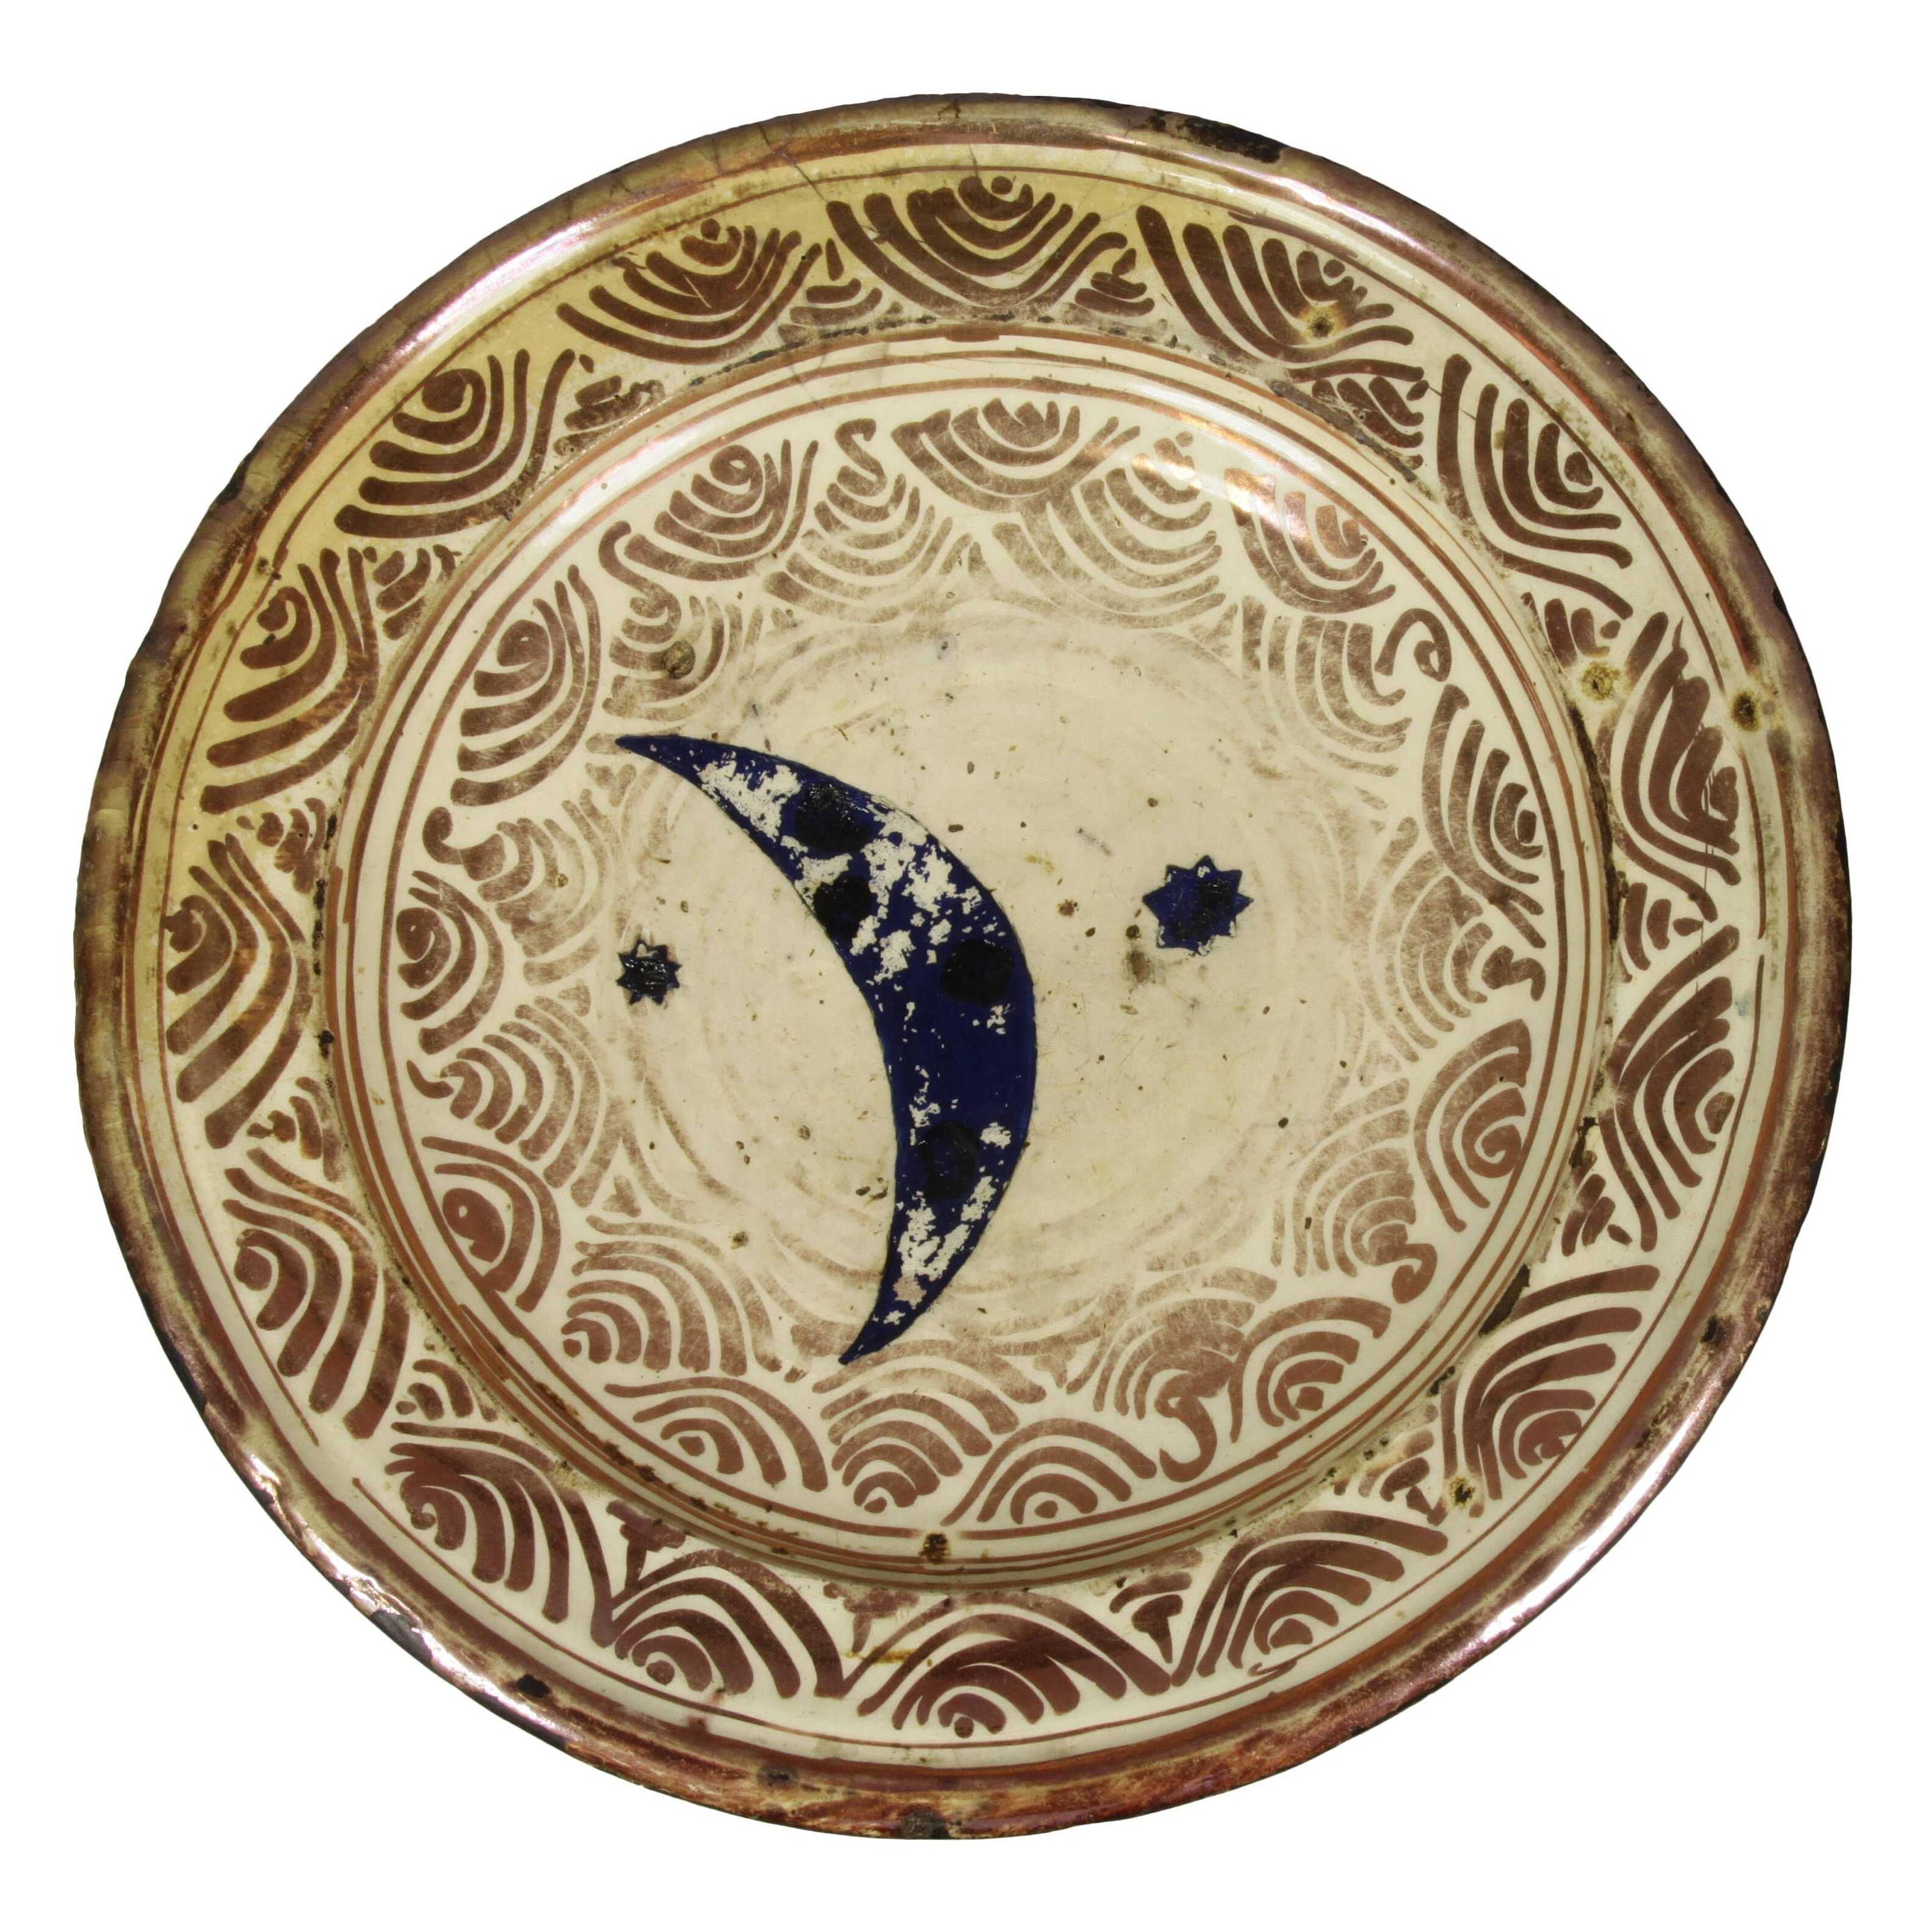 An Iberian tray that has a hand painted dark blue crescent moon and two stars in the middle.